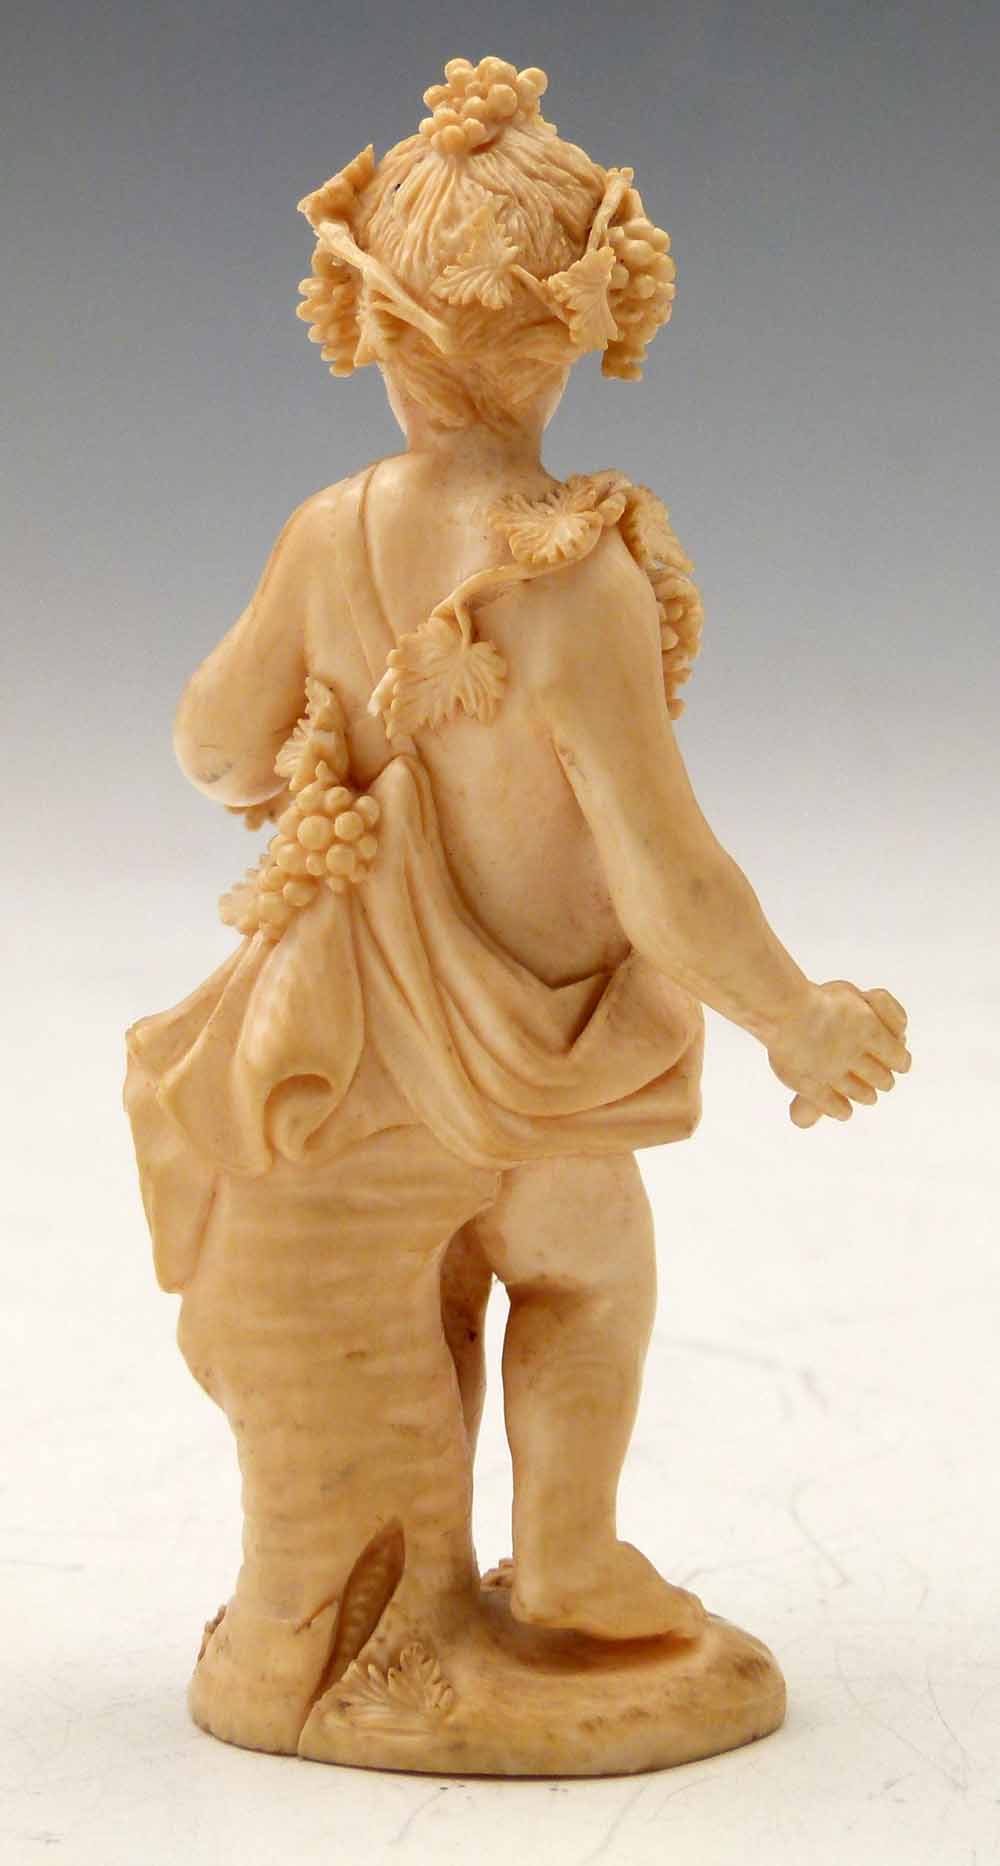 Carved ivory Bacchanalian standing figure of a boy draped with vines and grapes, leaning against a - Image 2 of 5